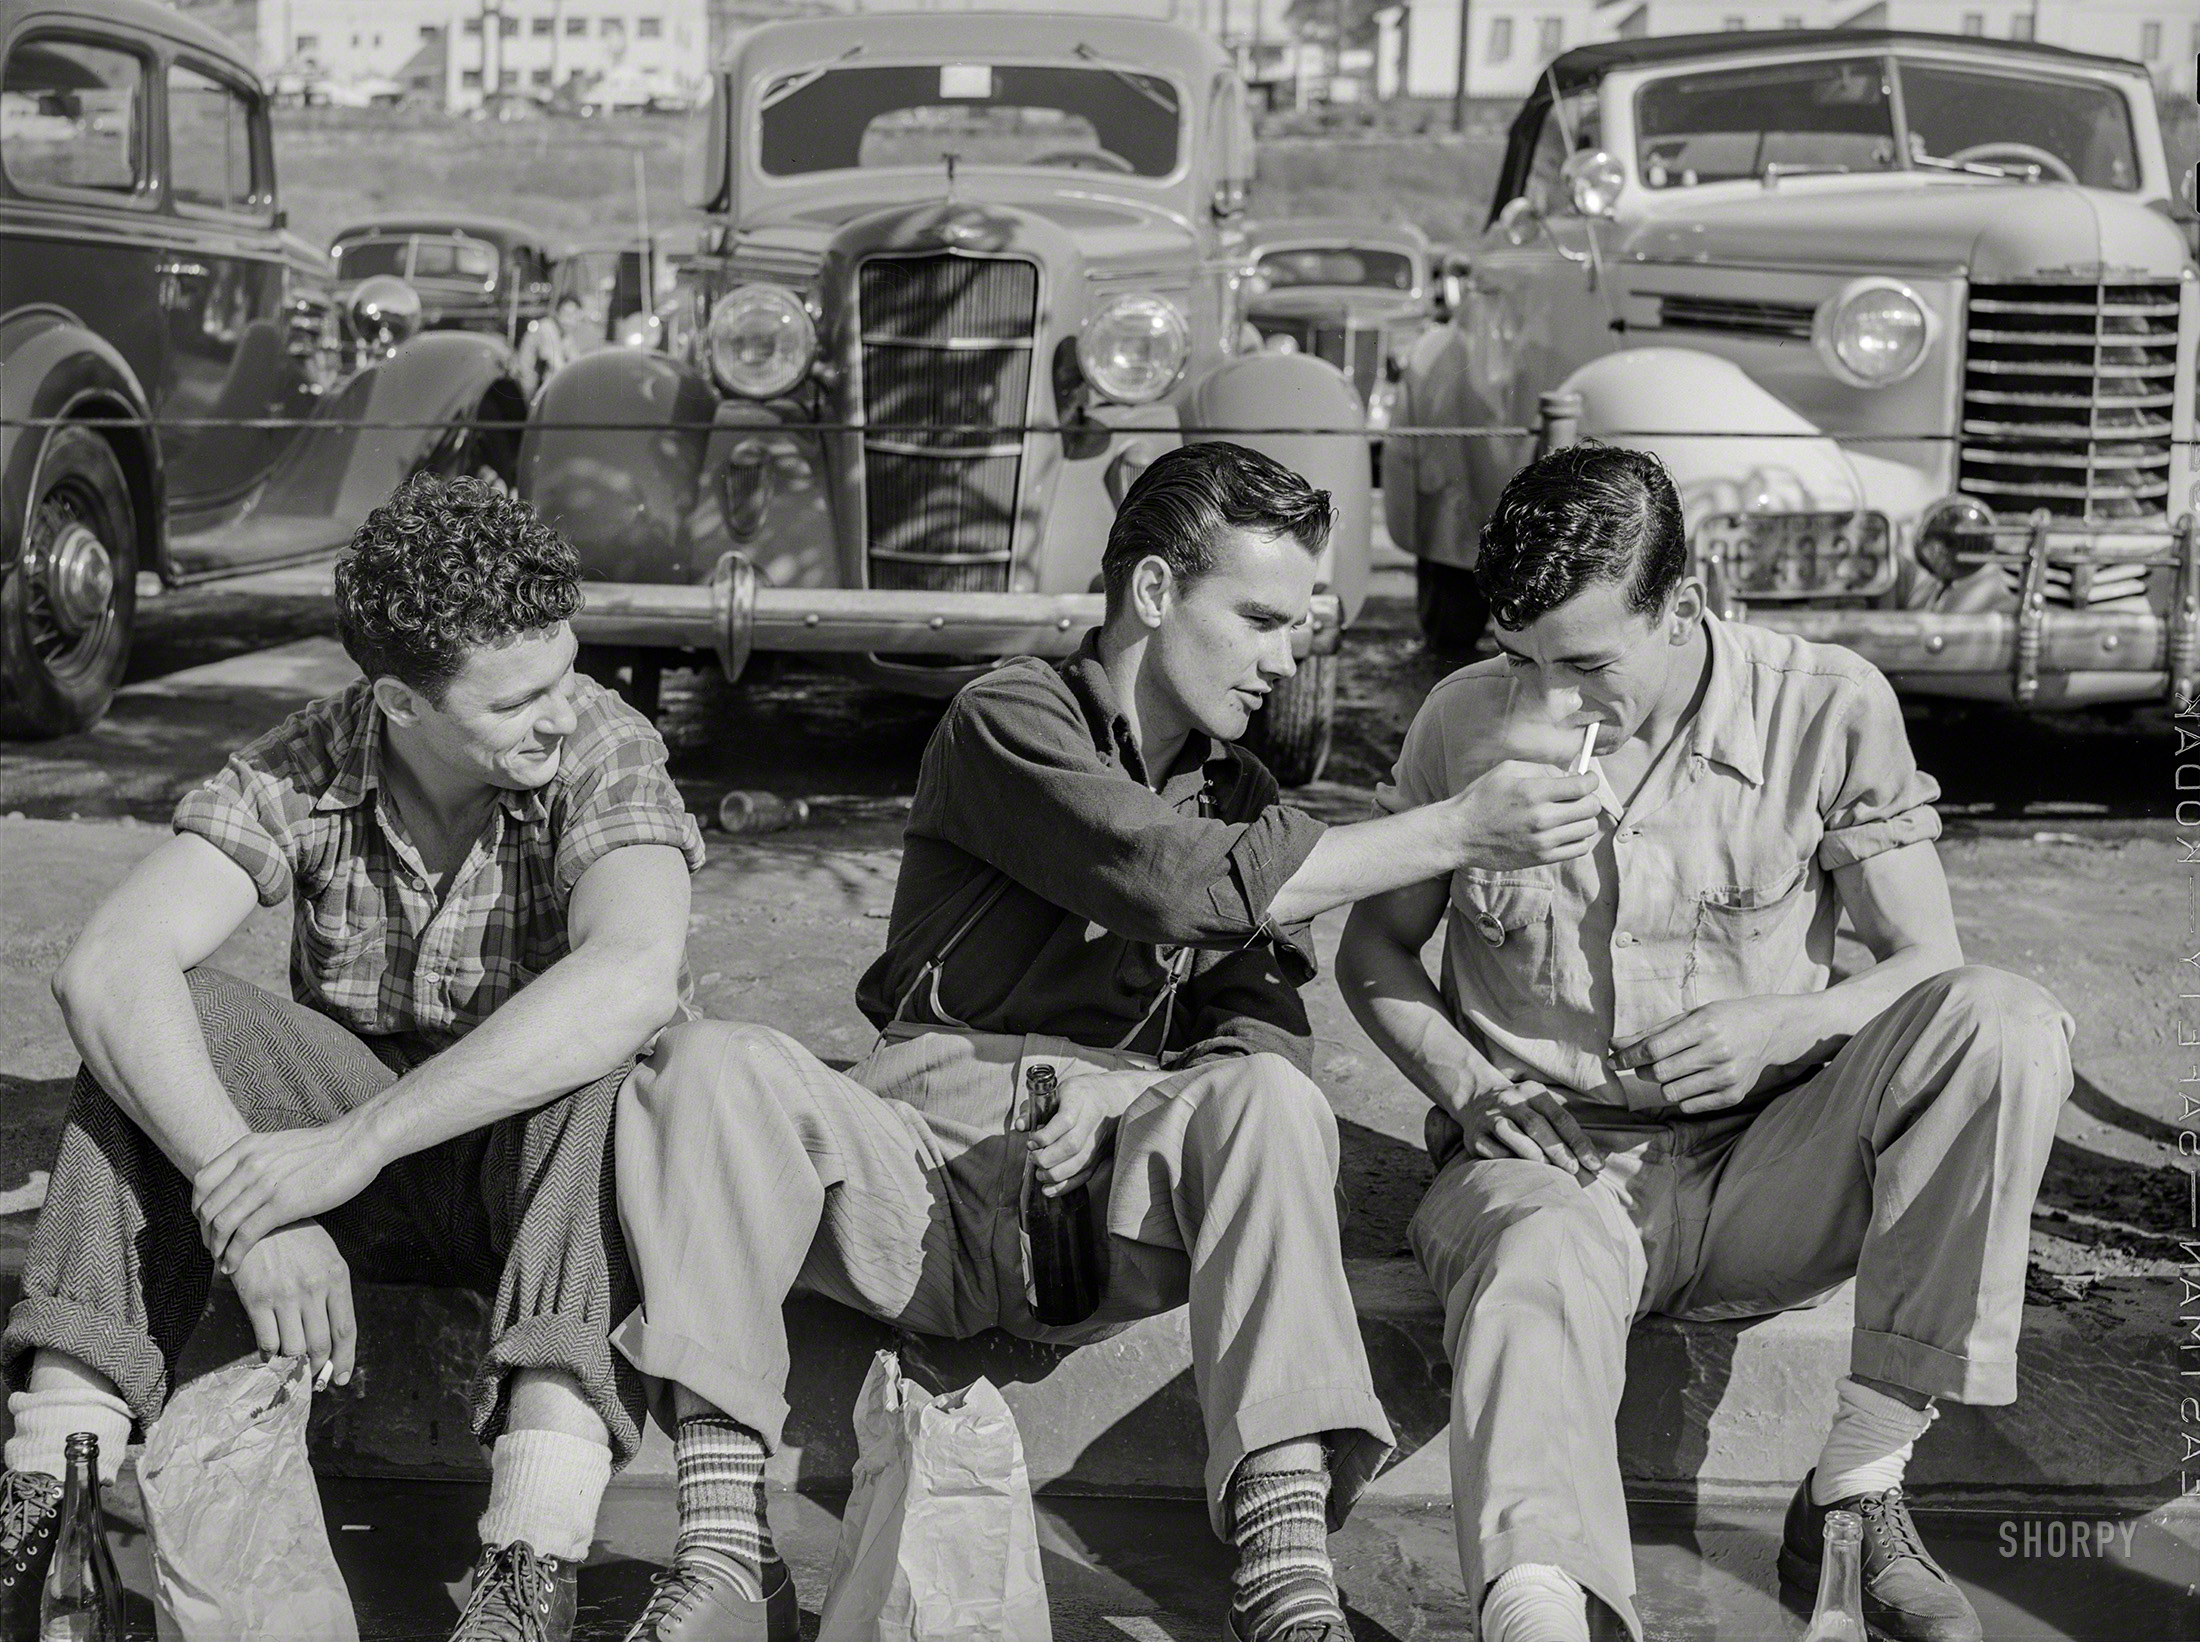 December 1940. "Workmen during lunch period, across the street from the Consolidated Aircraft factory. San Diego, California." Medium format negative by Russell Lee for the Farm Security Administration. View full size.